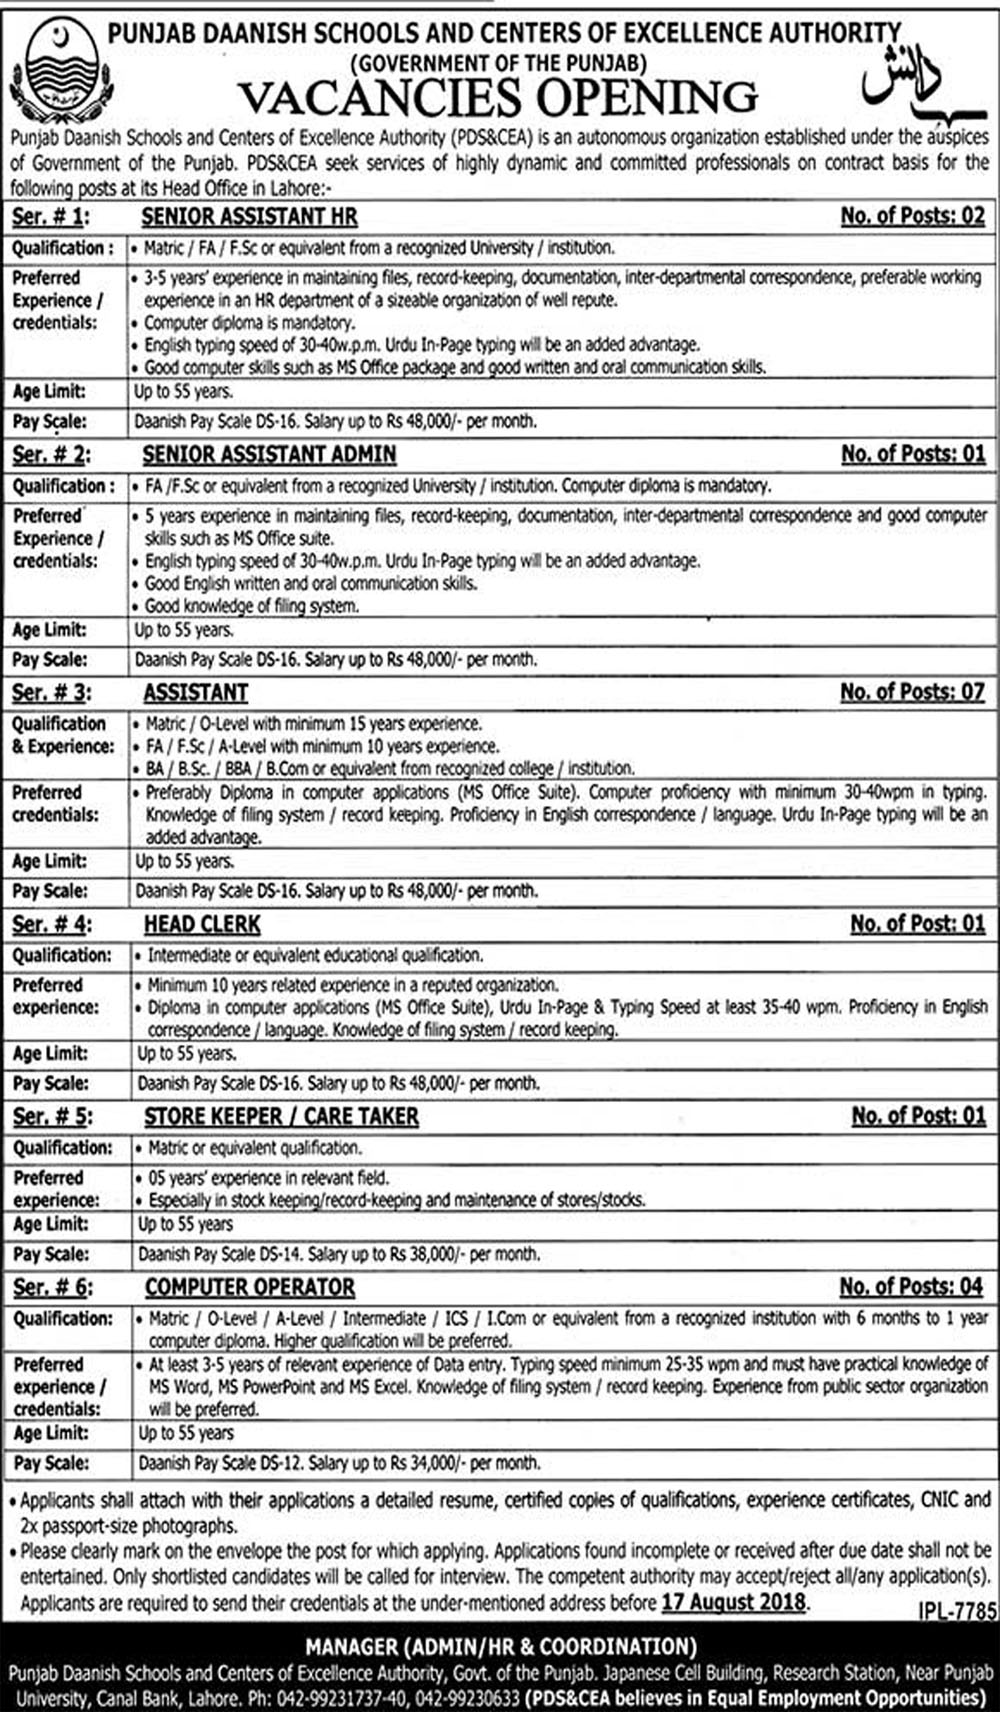  Job In Punjab Daanish School And Center For Excellence Authority  6 Aug 2018 